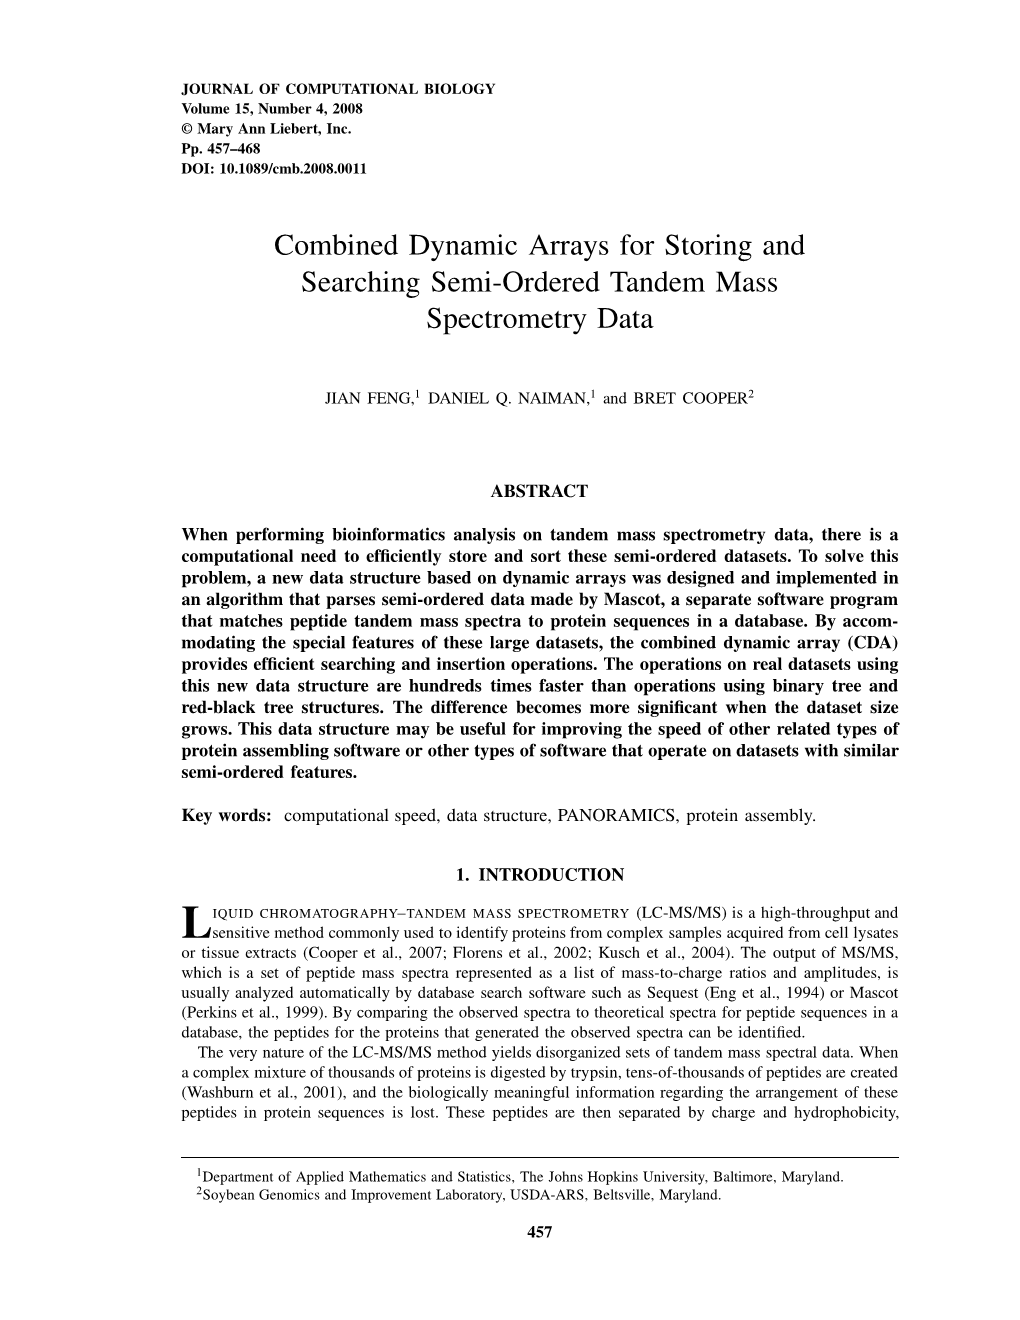 Combined Dynamic Arrays for Storing and Searching Semi-Ordered Tandem Mass Spectrometry Data